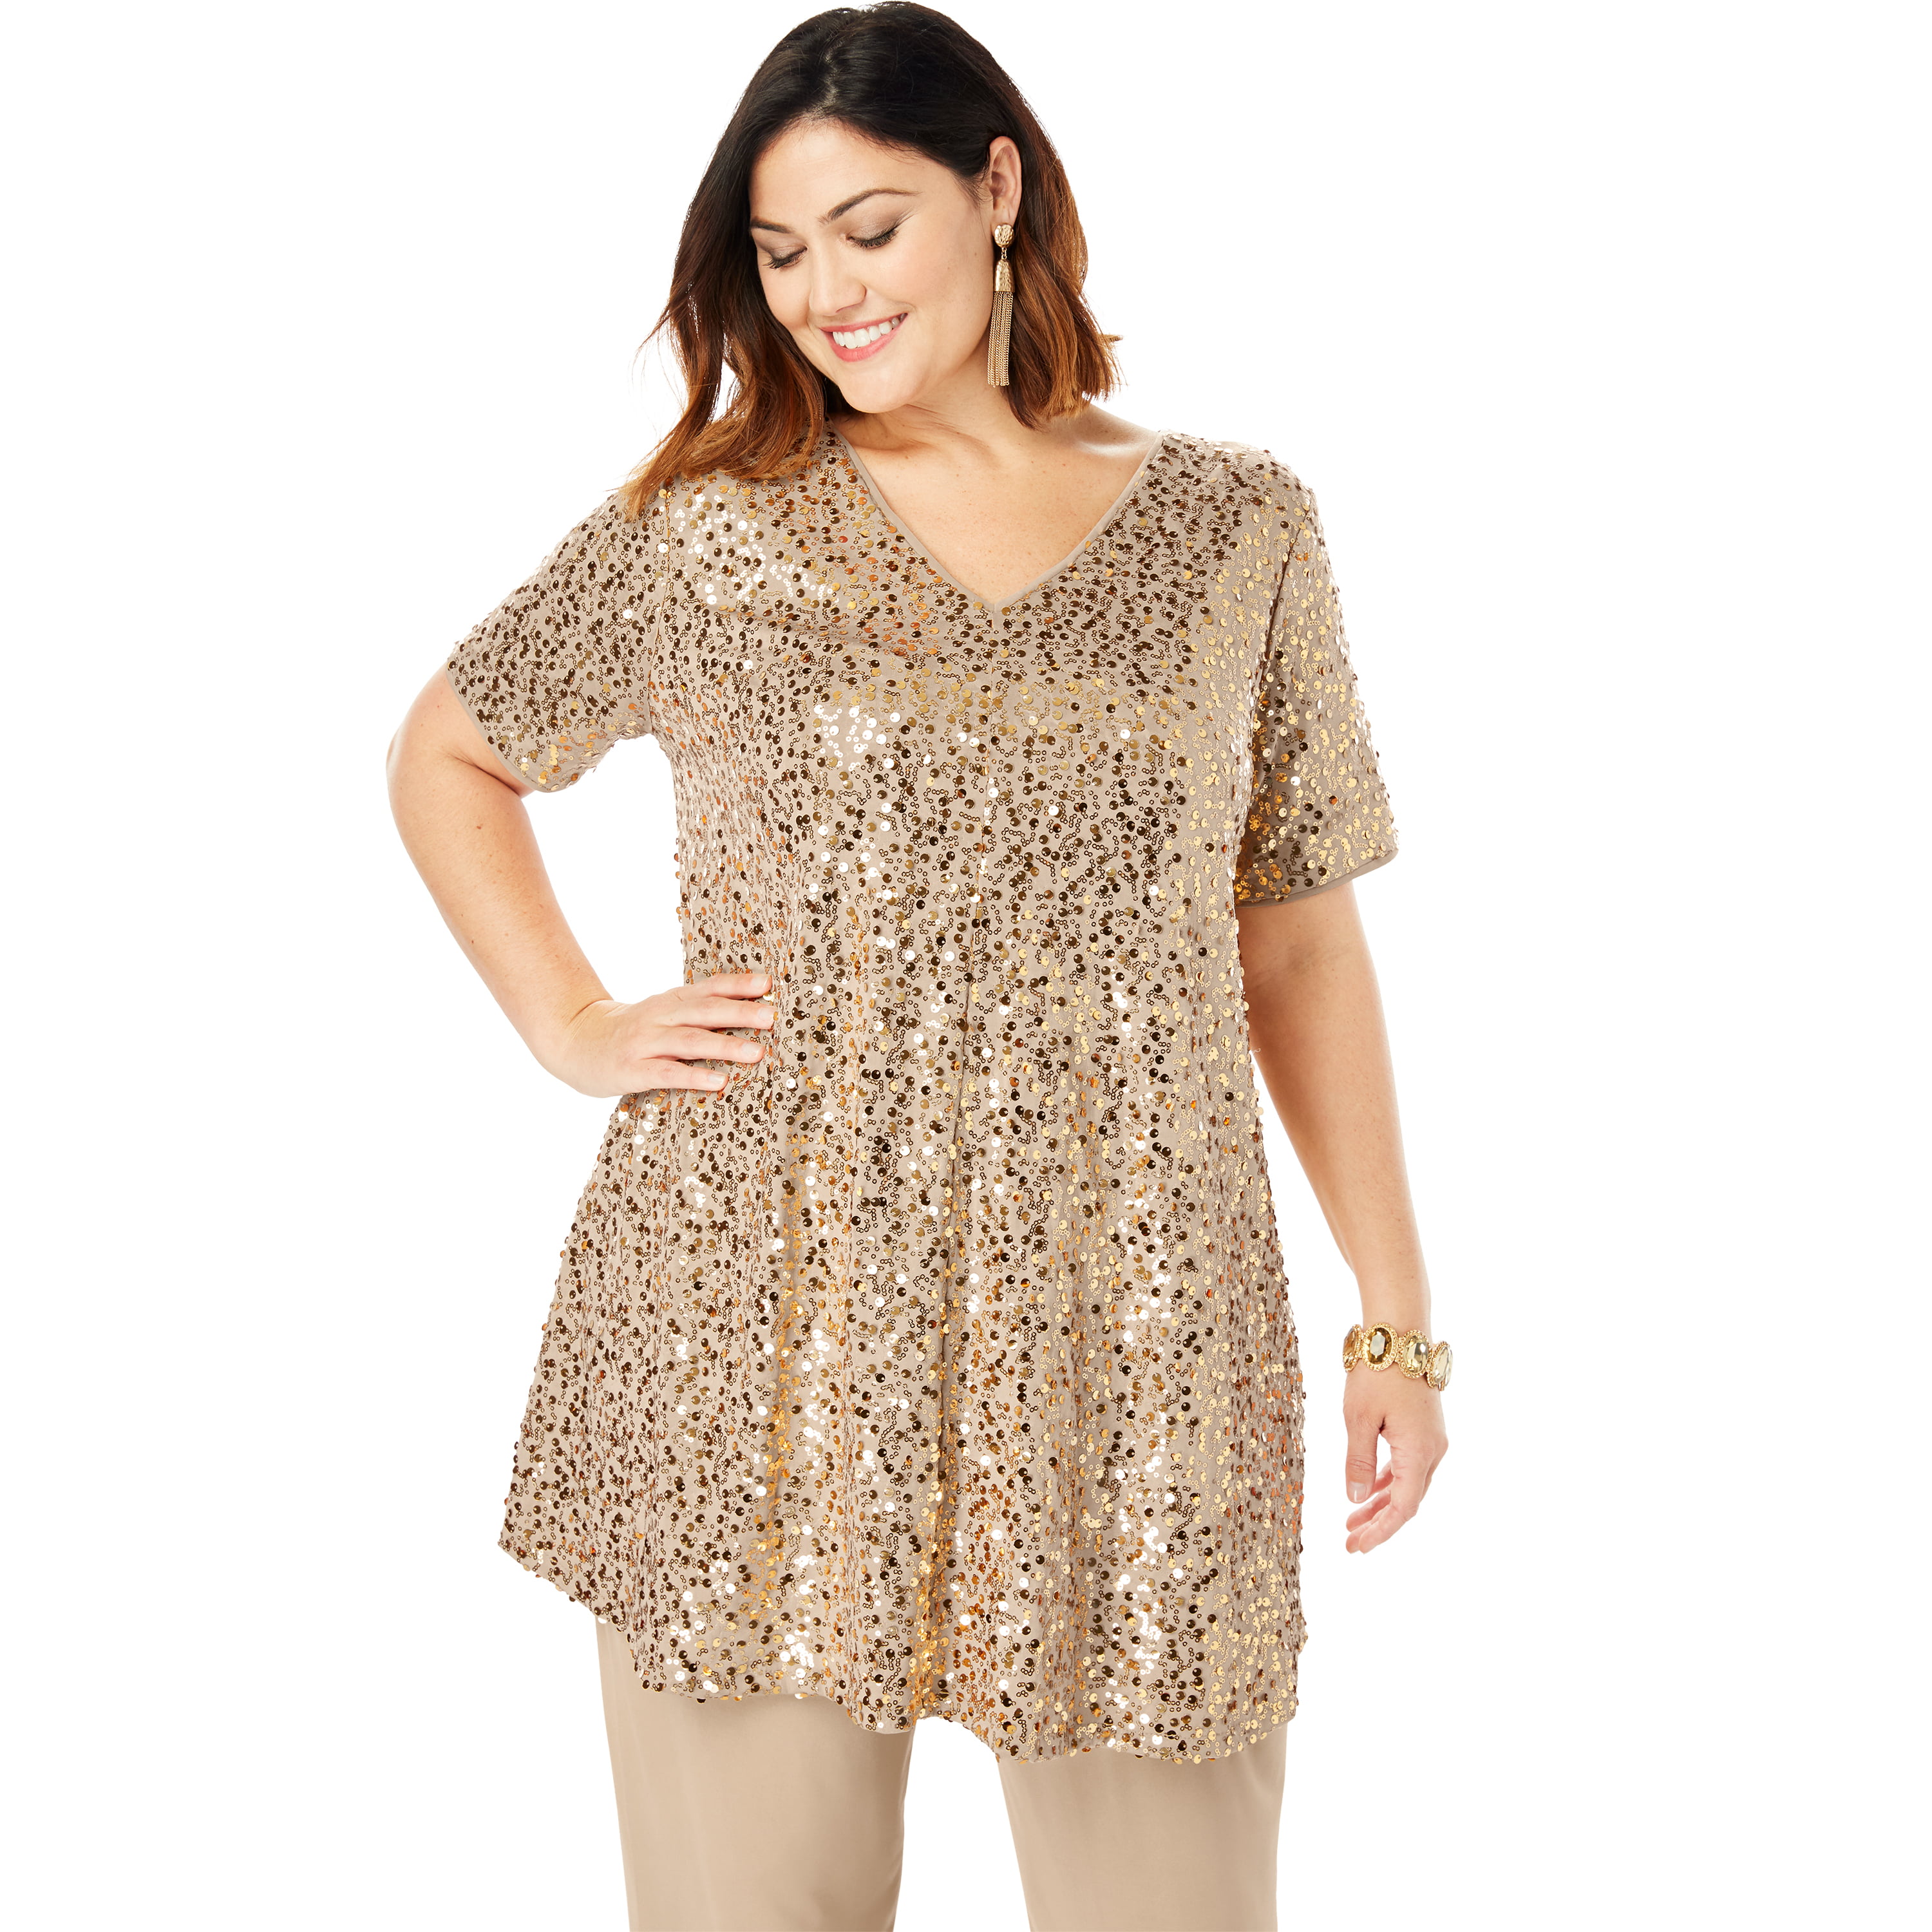 Roamans Womens Plus Size Sequin Tunic & Pant Set Made in USA Formal Sparkly Chiffon 